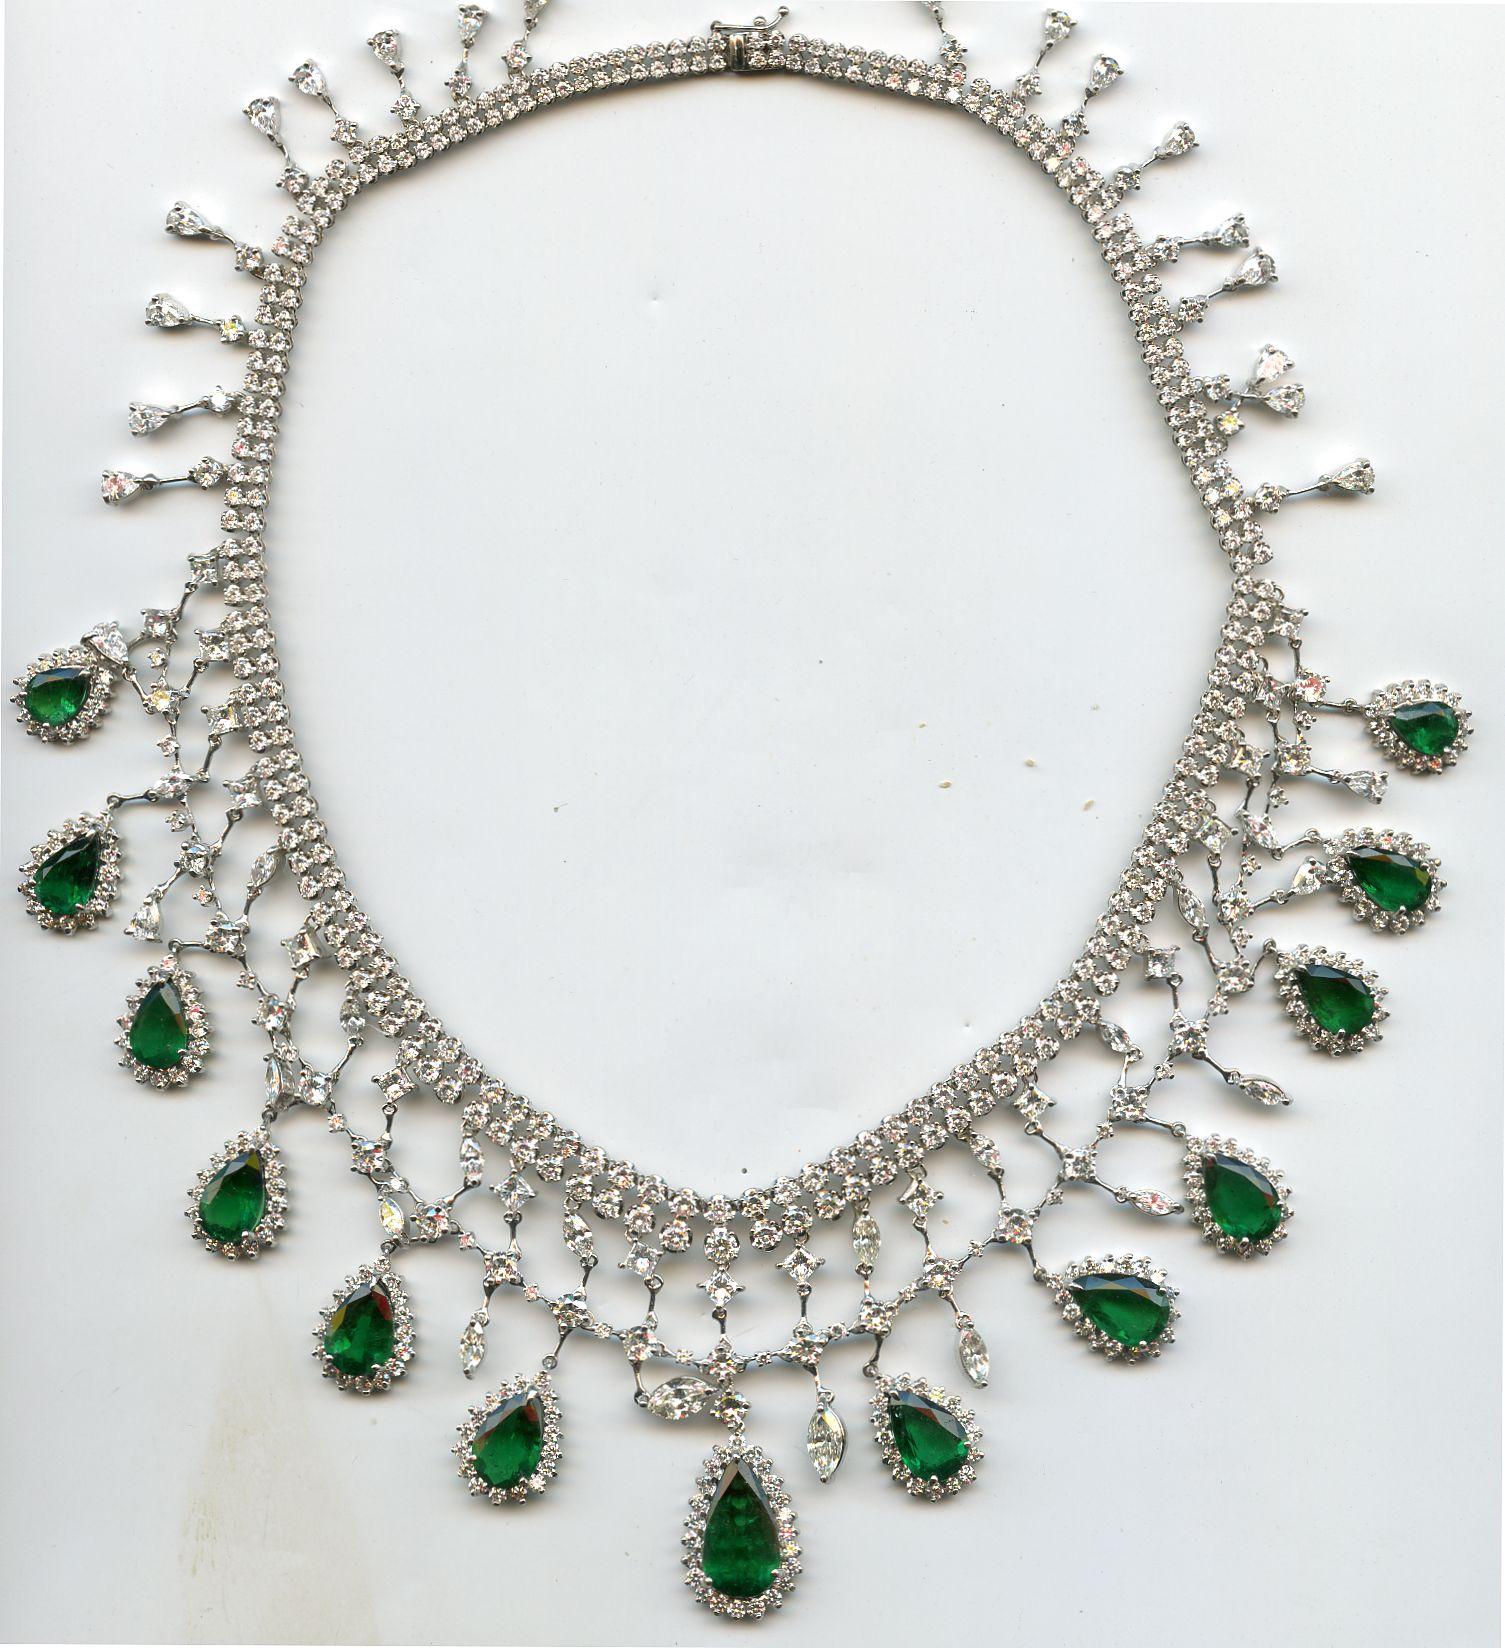 NPSE1- Necklace features a total of 44.07 carats of round, pear, marquise, and princess shape white diamonds. Also, the center emeralds add a total of 38.80 carats. Mounted in white gold, this necklace has been made to make a statement. 